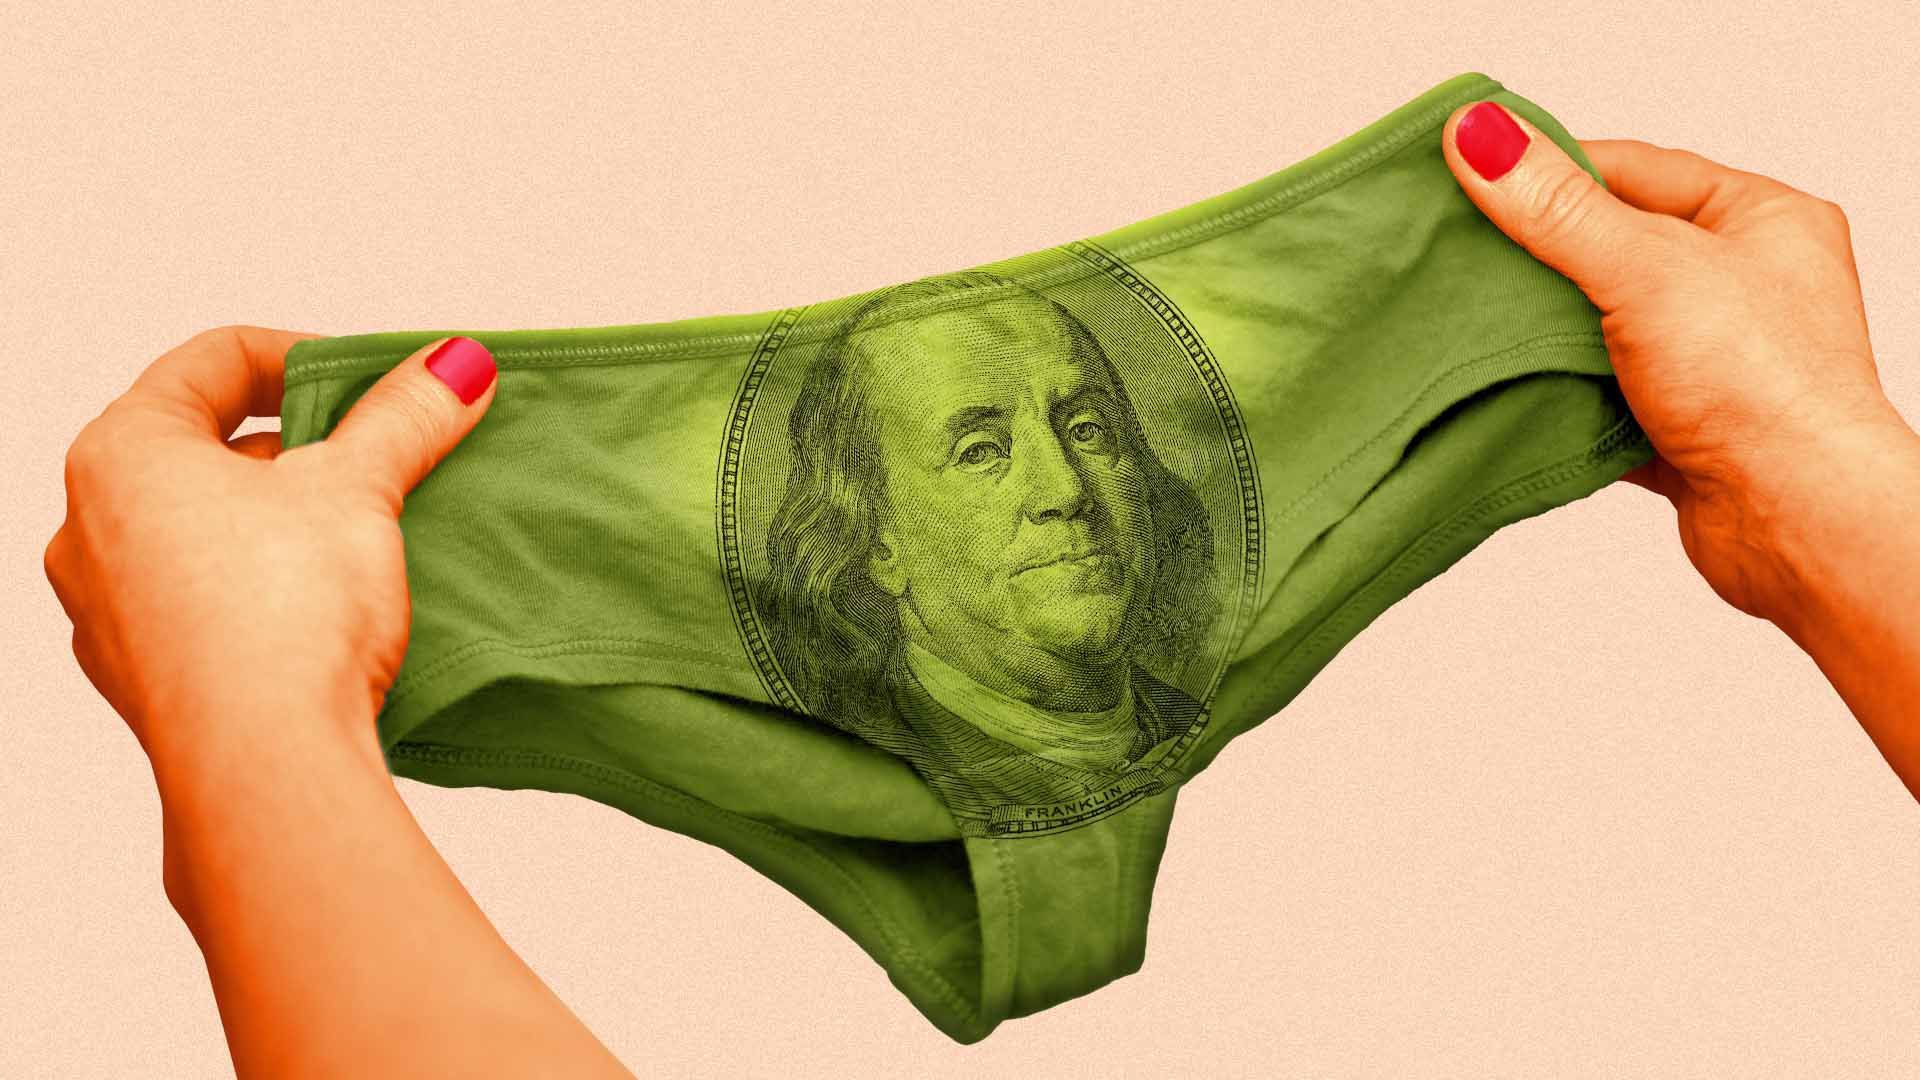 Illustration of a pair of hands holding up a pair of green underwear with Ben Franklin's face from a hundred dollar bill on the front